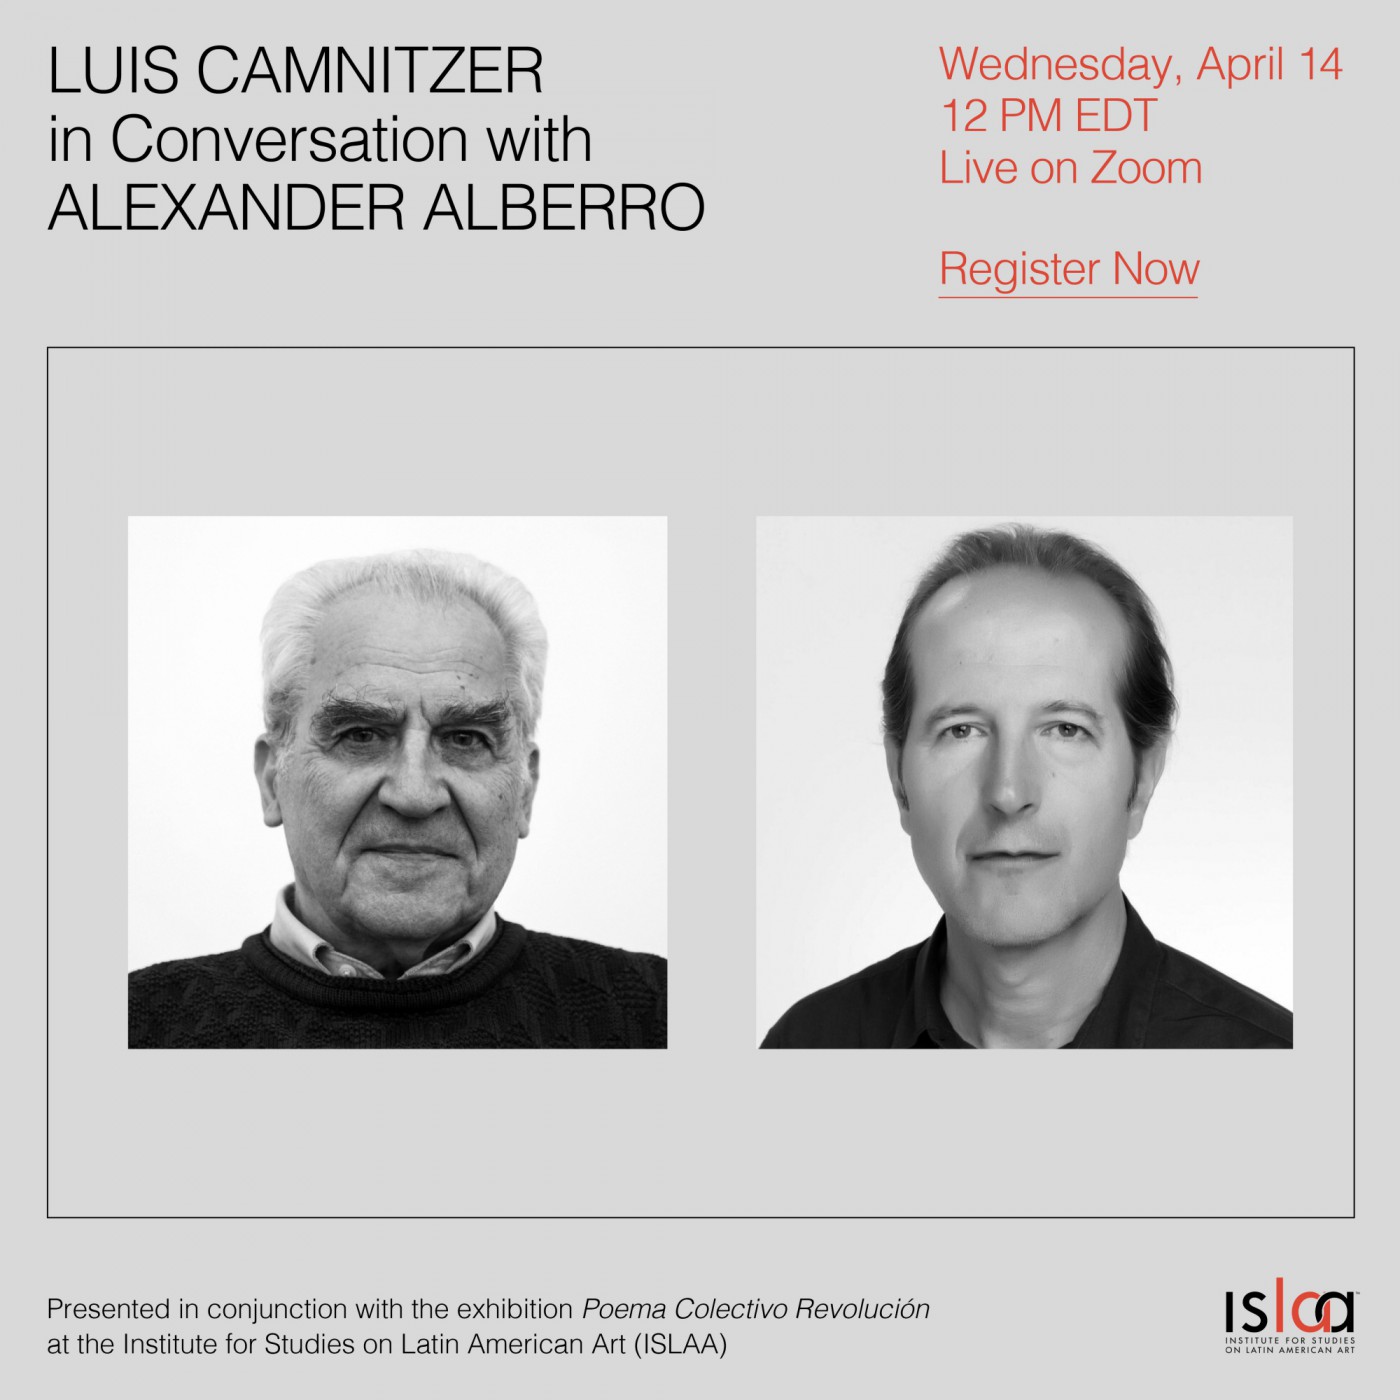 Event poster with a black and white portrait of Luis Camnitzer and a portrait of Alexander Alberro.